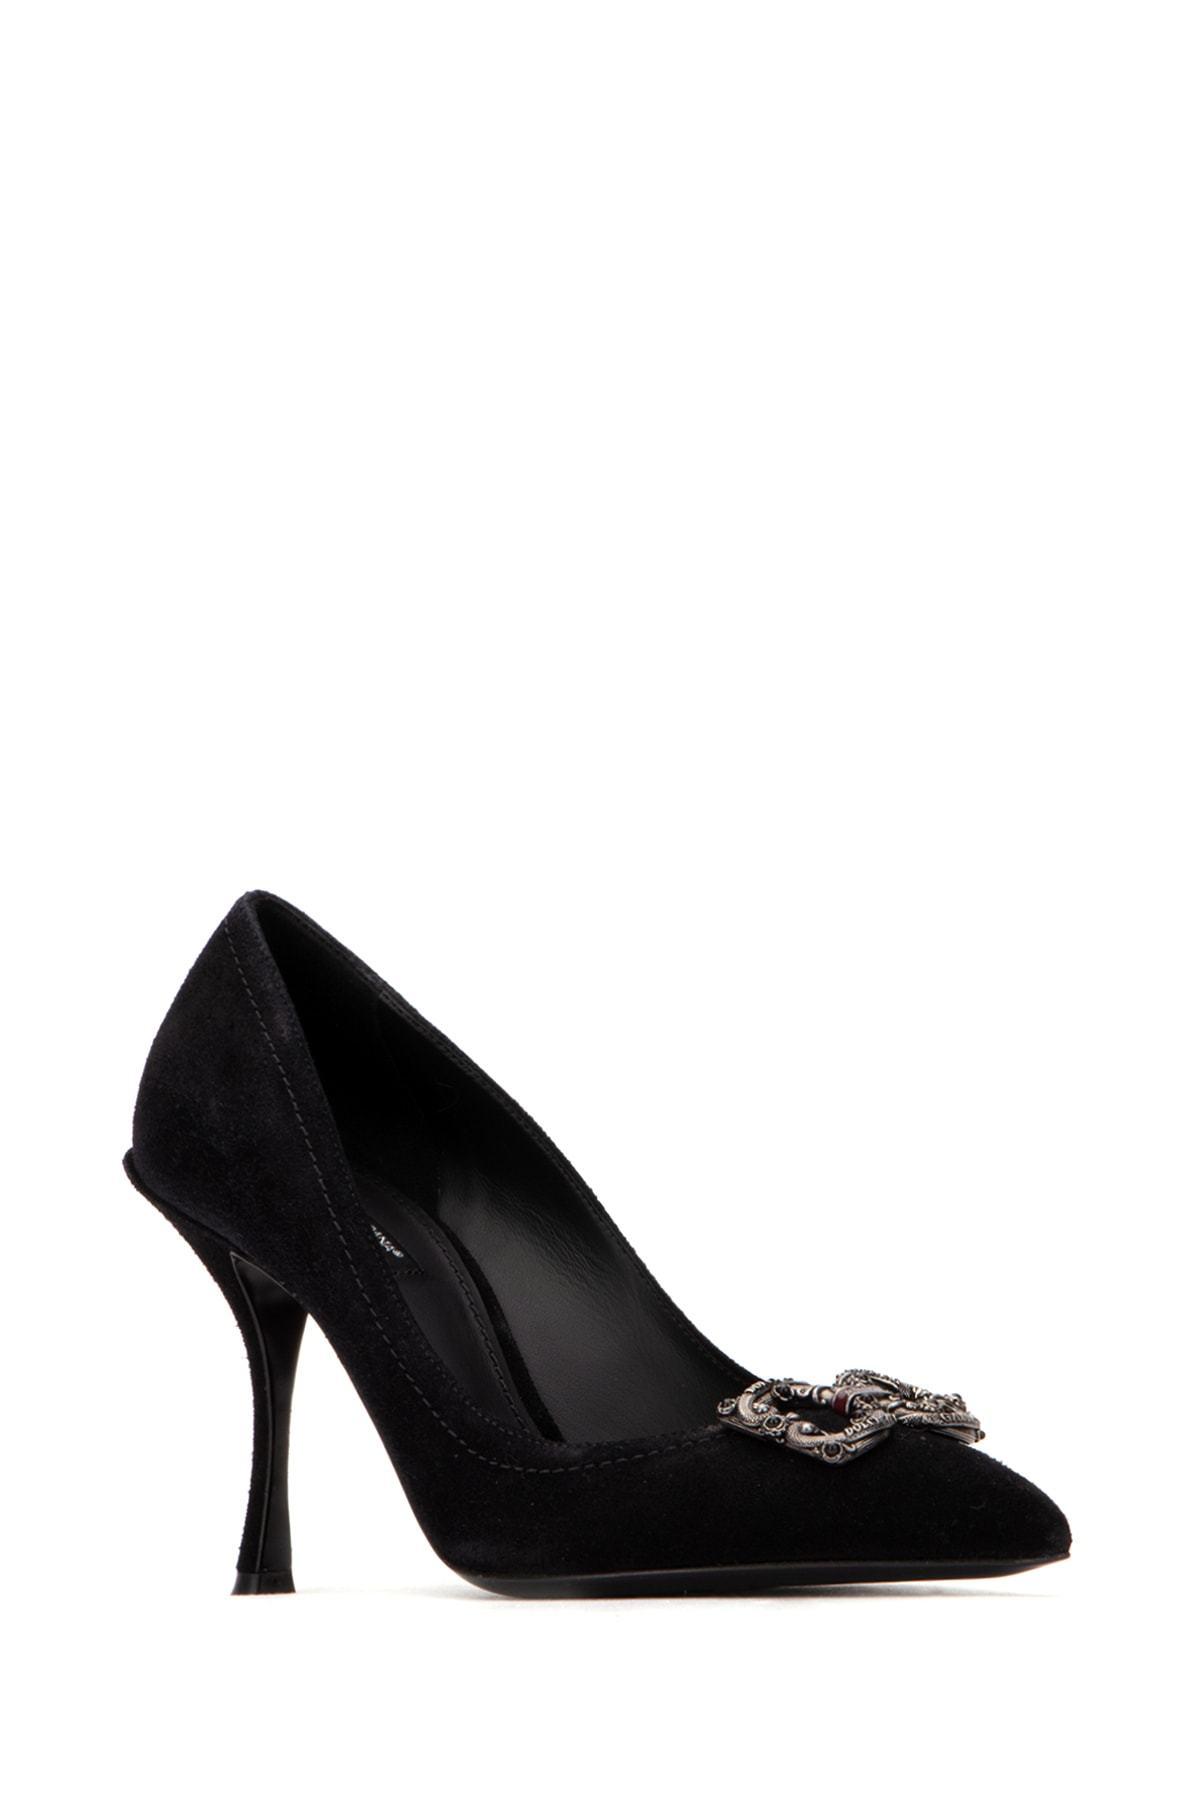 Dolce & Gabbana Leather Amore Logo Pumps in Black - Lyst